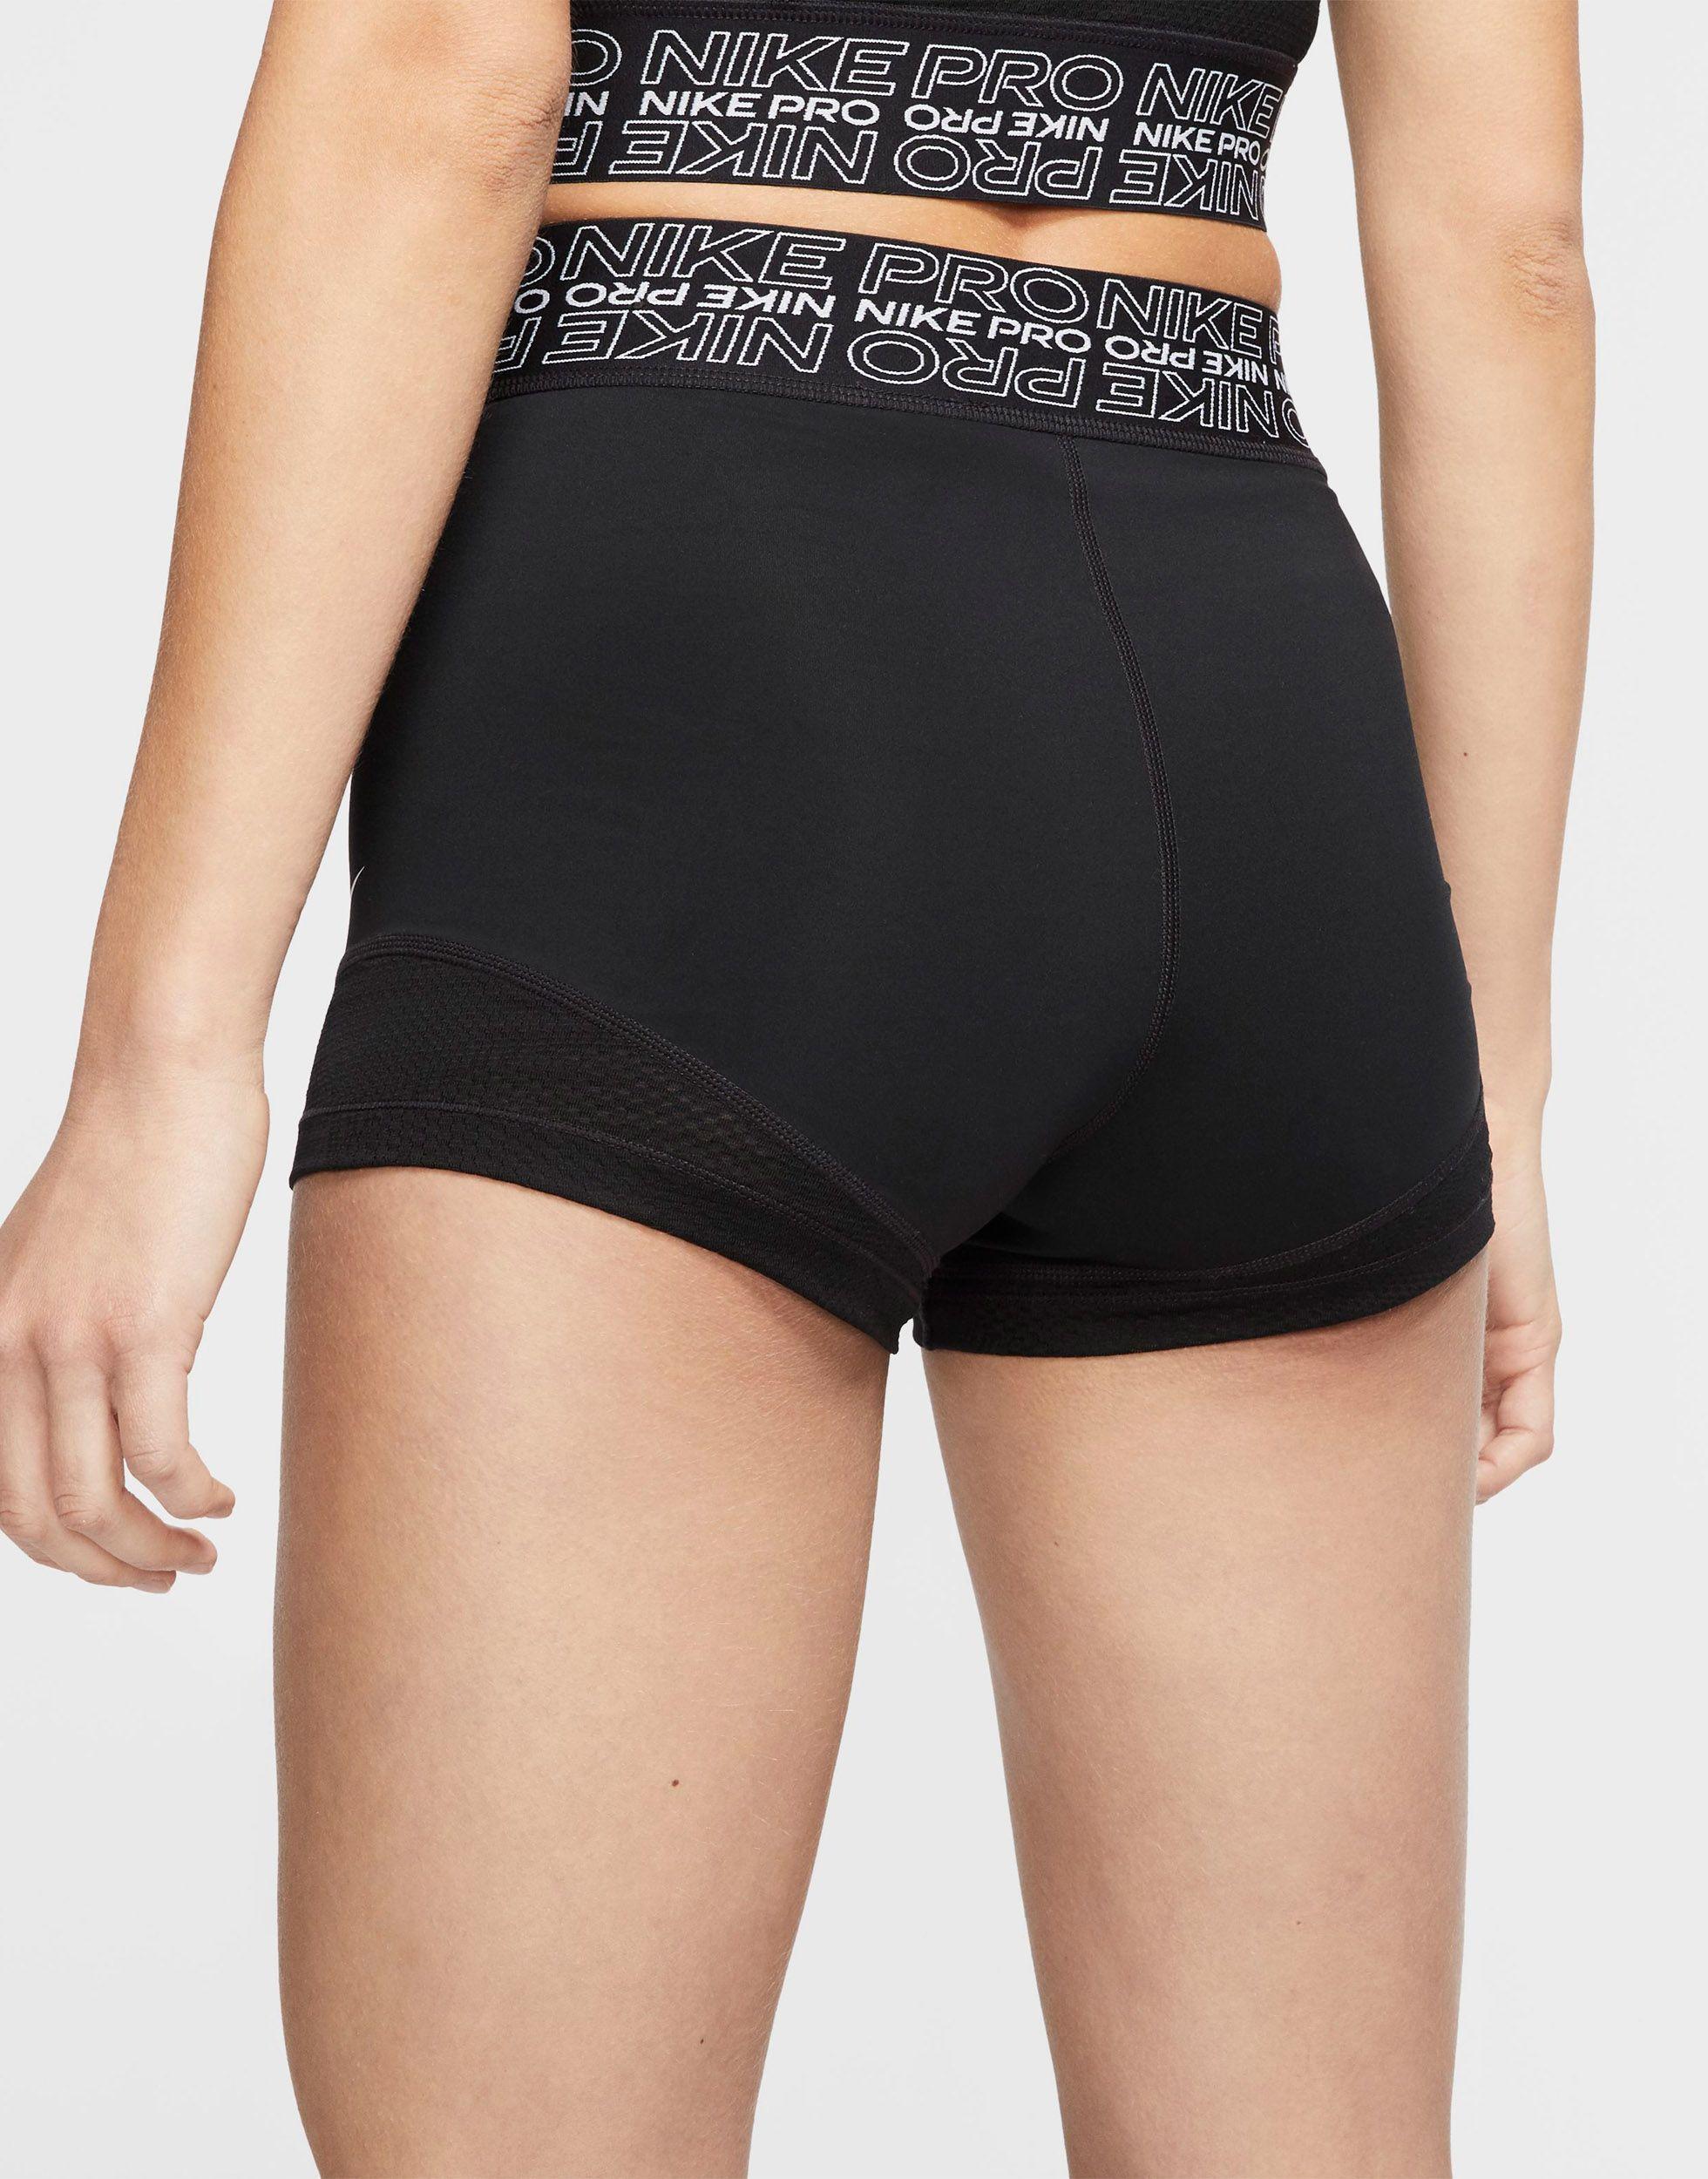 Nike Nike Pro Training 3 Inch Shorts With Mesh Inserts in Black | Lyst  Canada